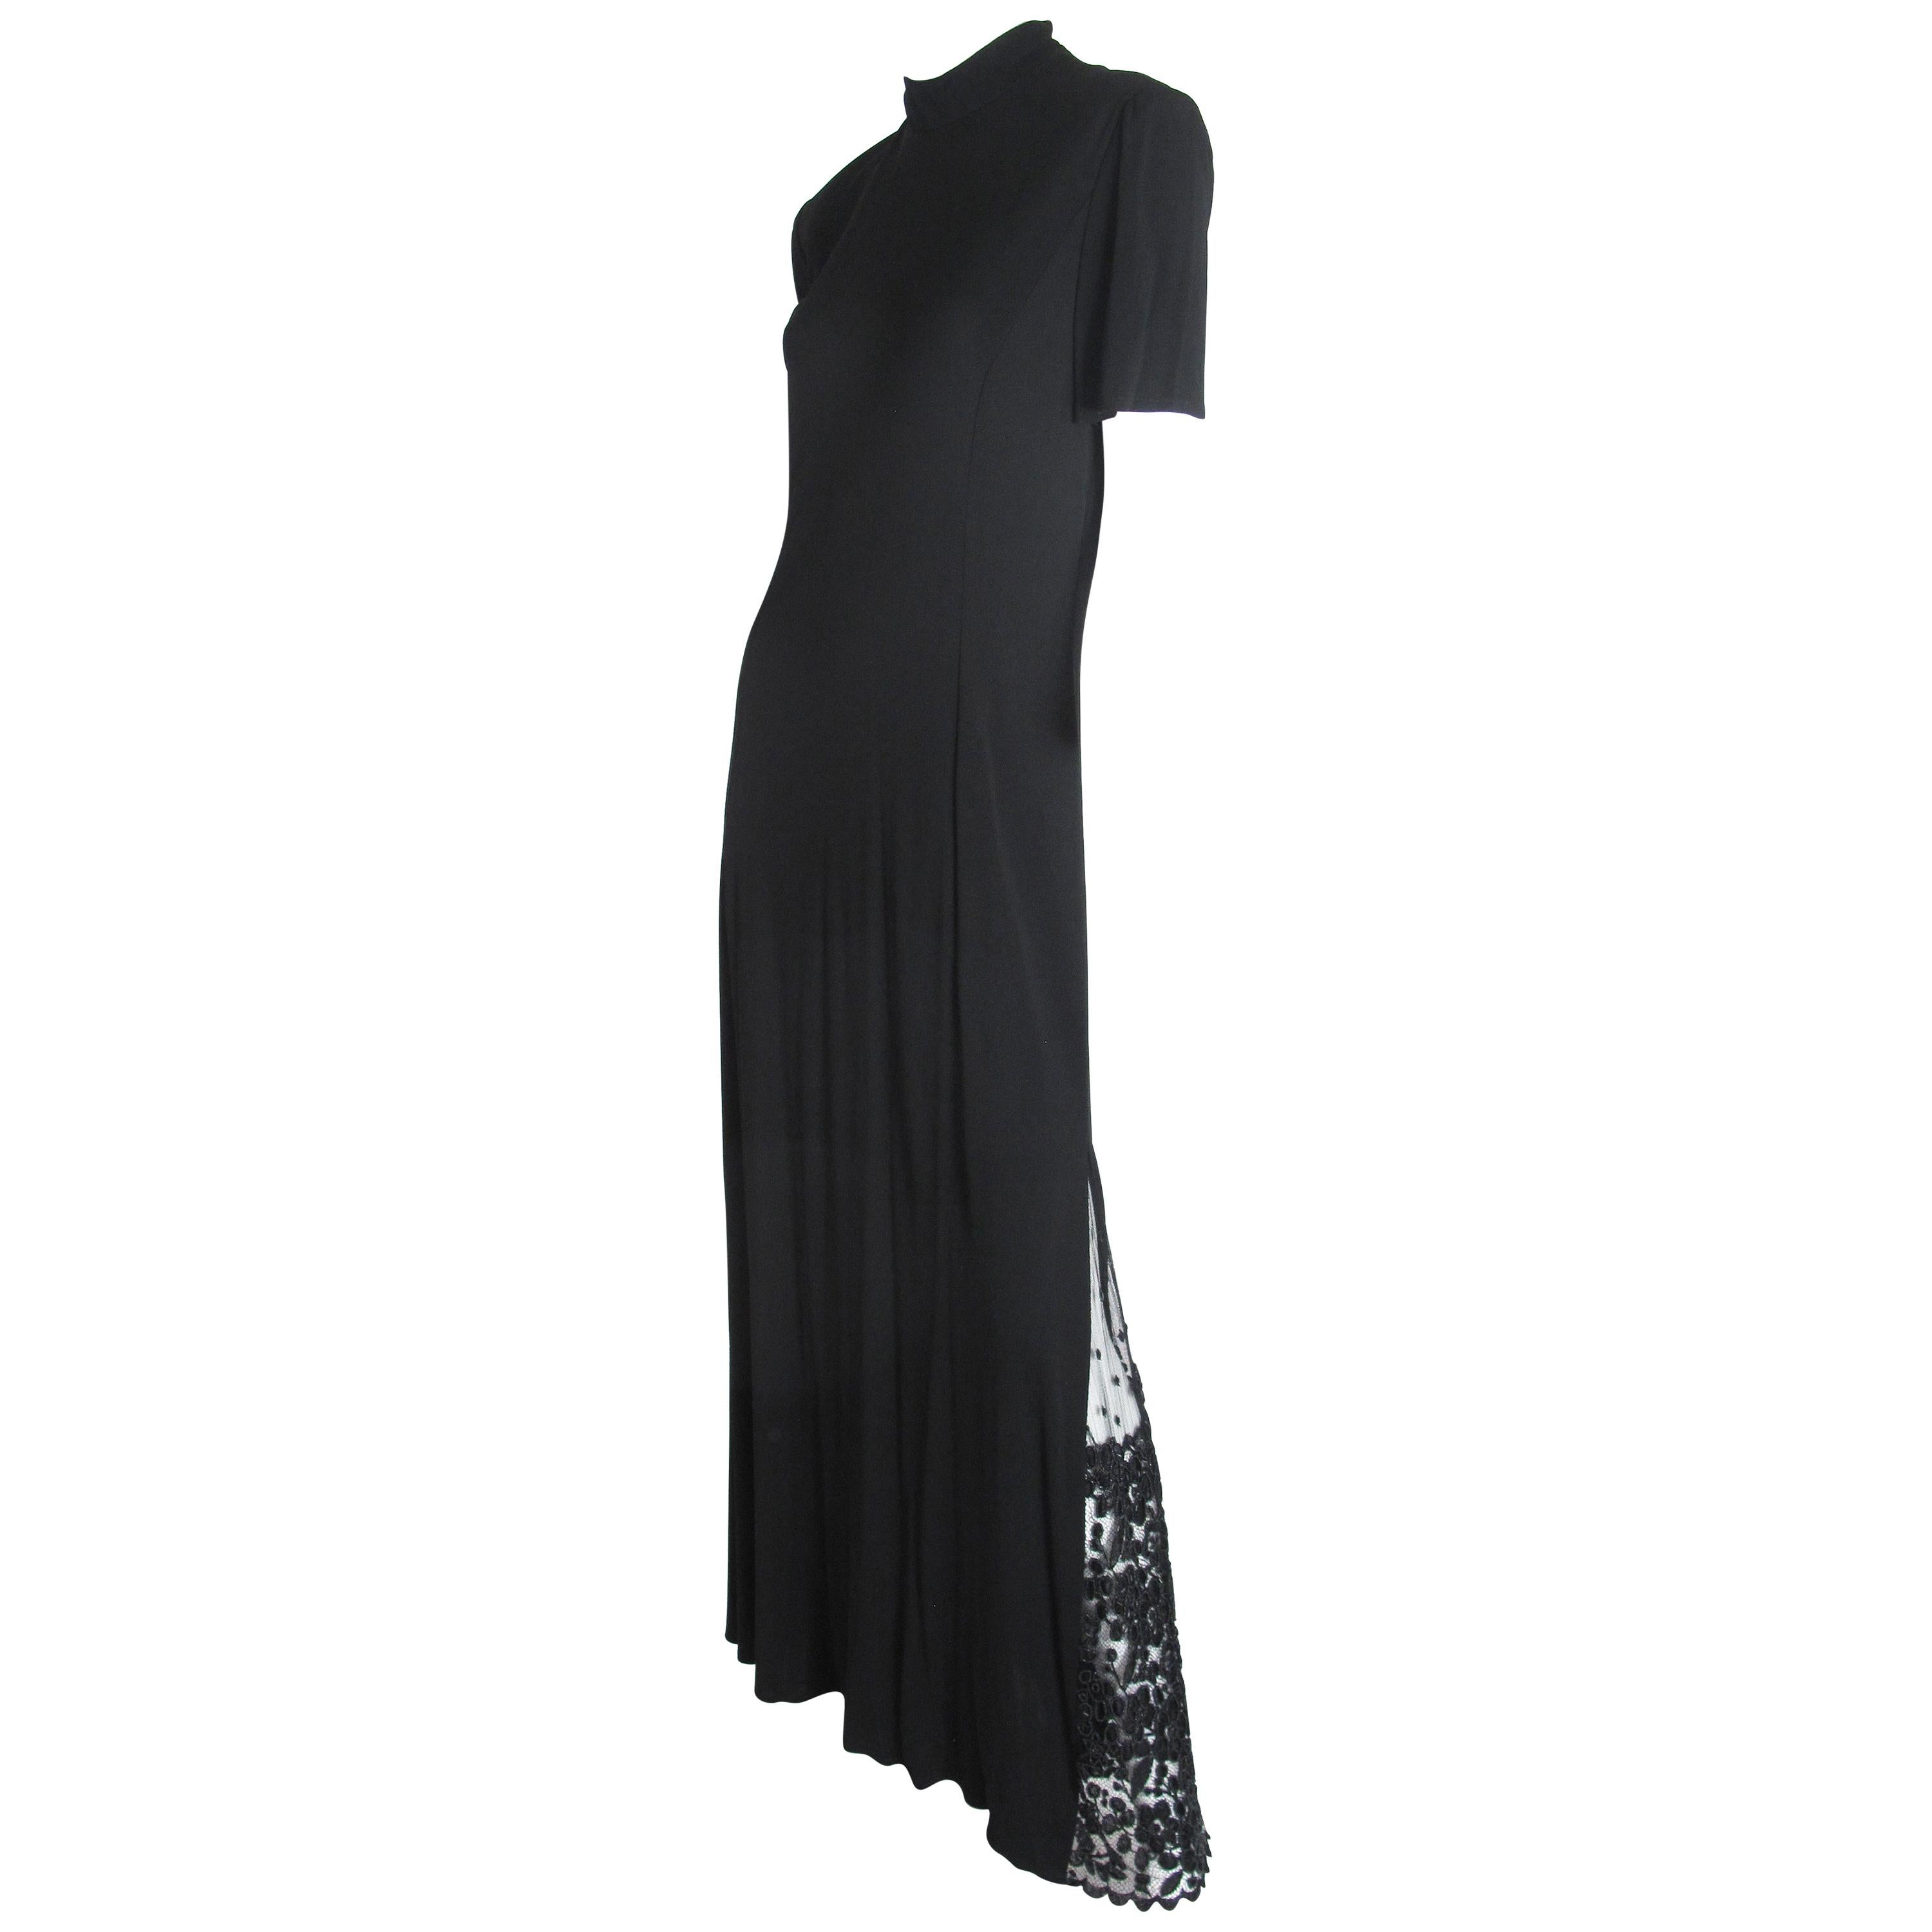 Badgley Mischka Black Evening Gown with Lace Insert